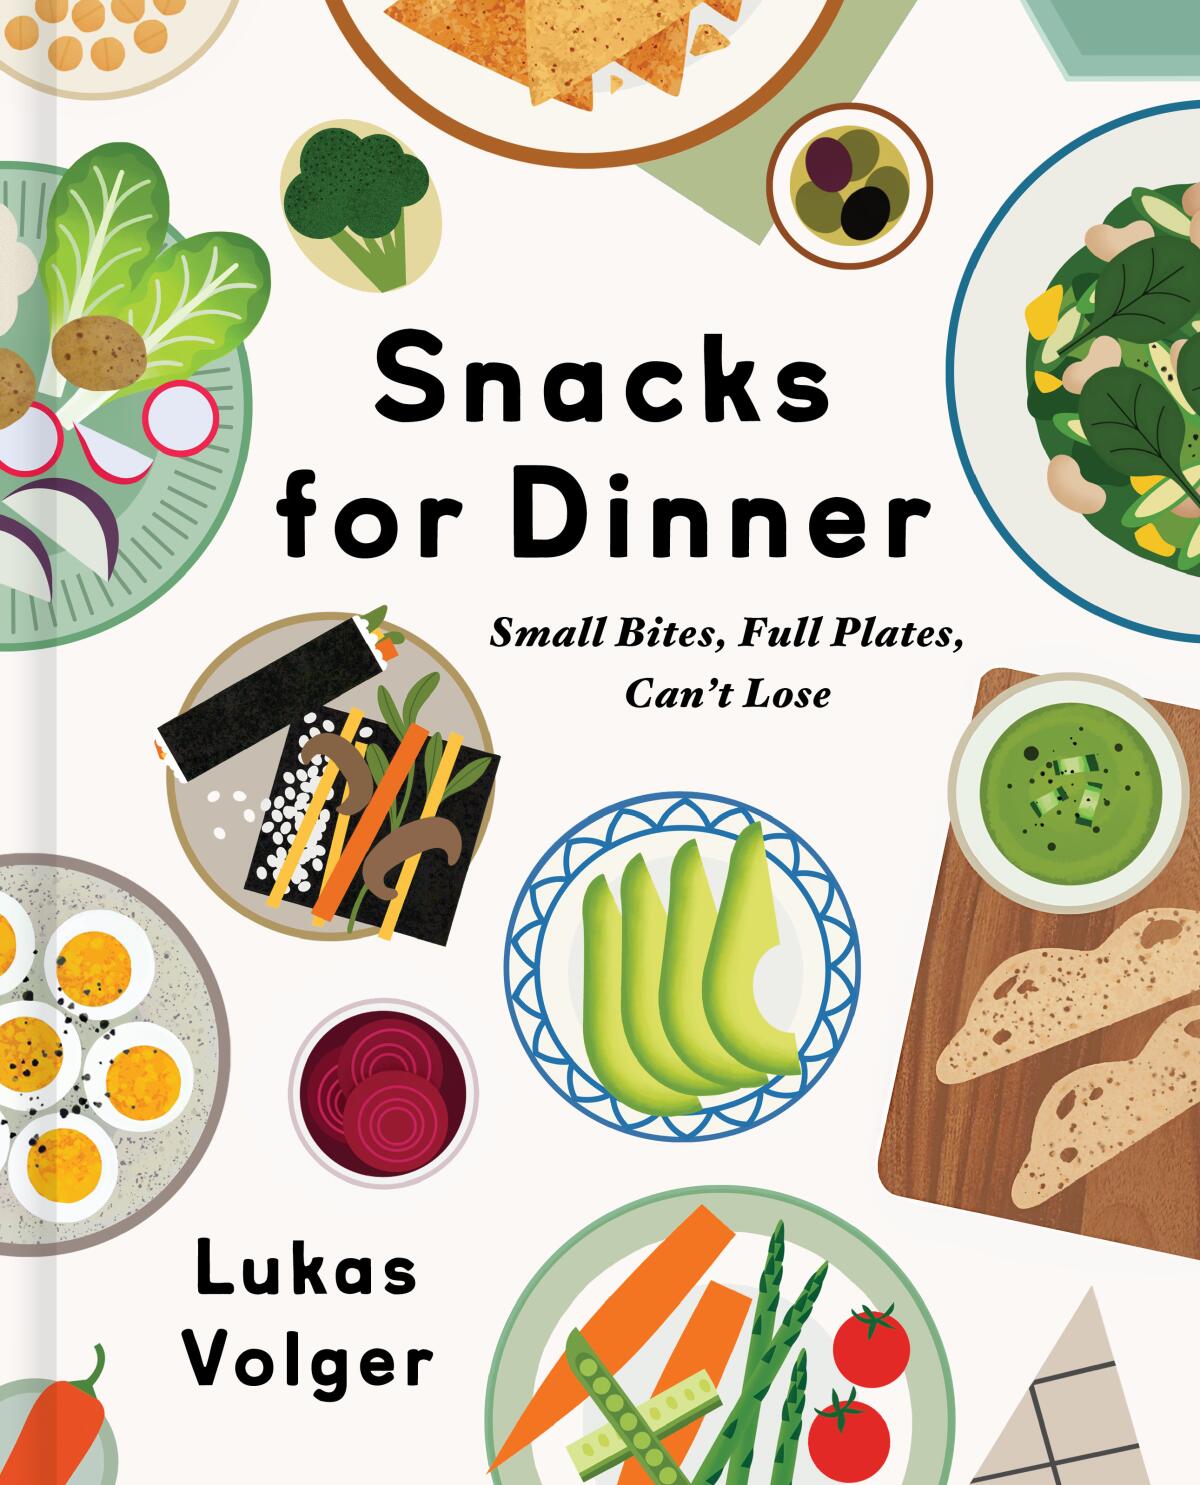 The book cover of "Snacks for Dinner: Small Bites, Full Plates, Can't Lose" by Lukas Volger